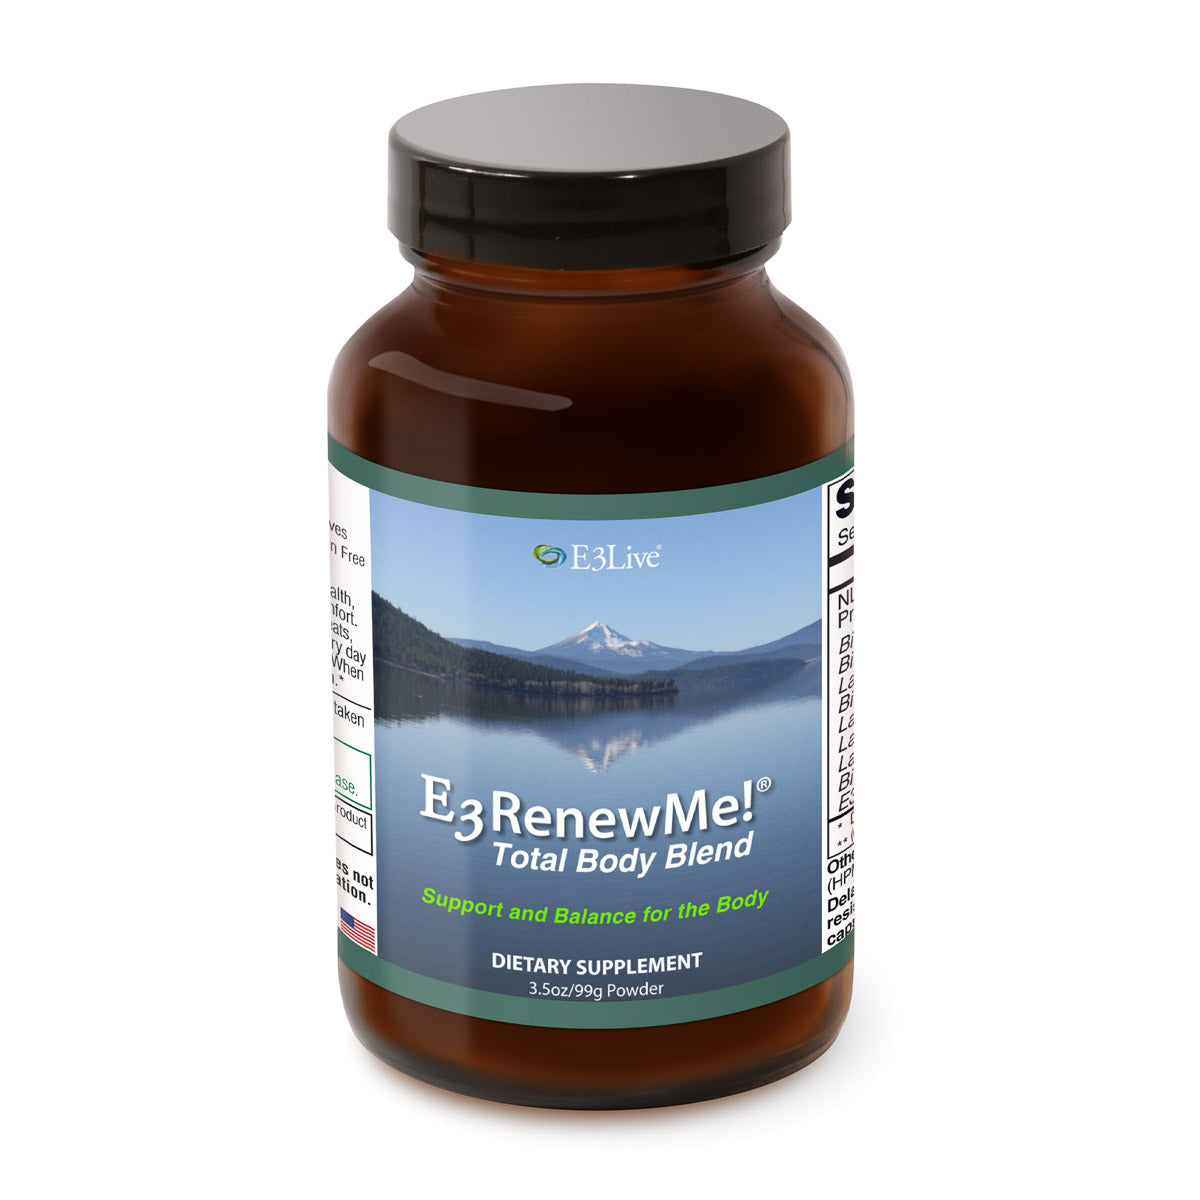 E3 RenewMe! Powder | E3 Live | Raw Living UK | Super Foods | E3RenewMe! with Camu Camu, is formulated to minimise whole body pain, provide healthy assistance for bone and joint support &amp; also help increase flexibility.